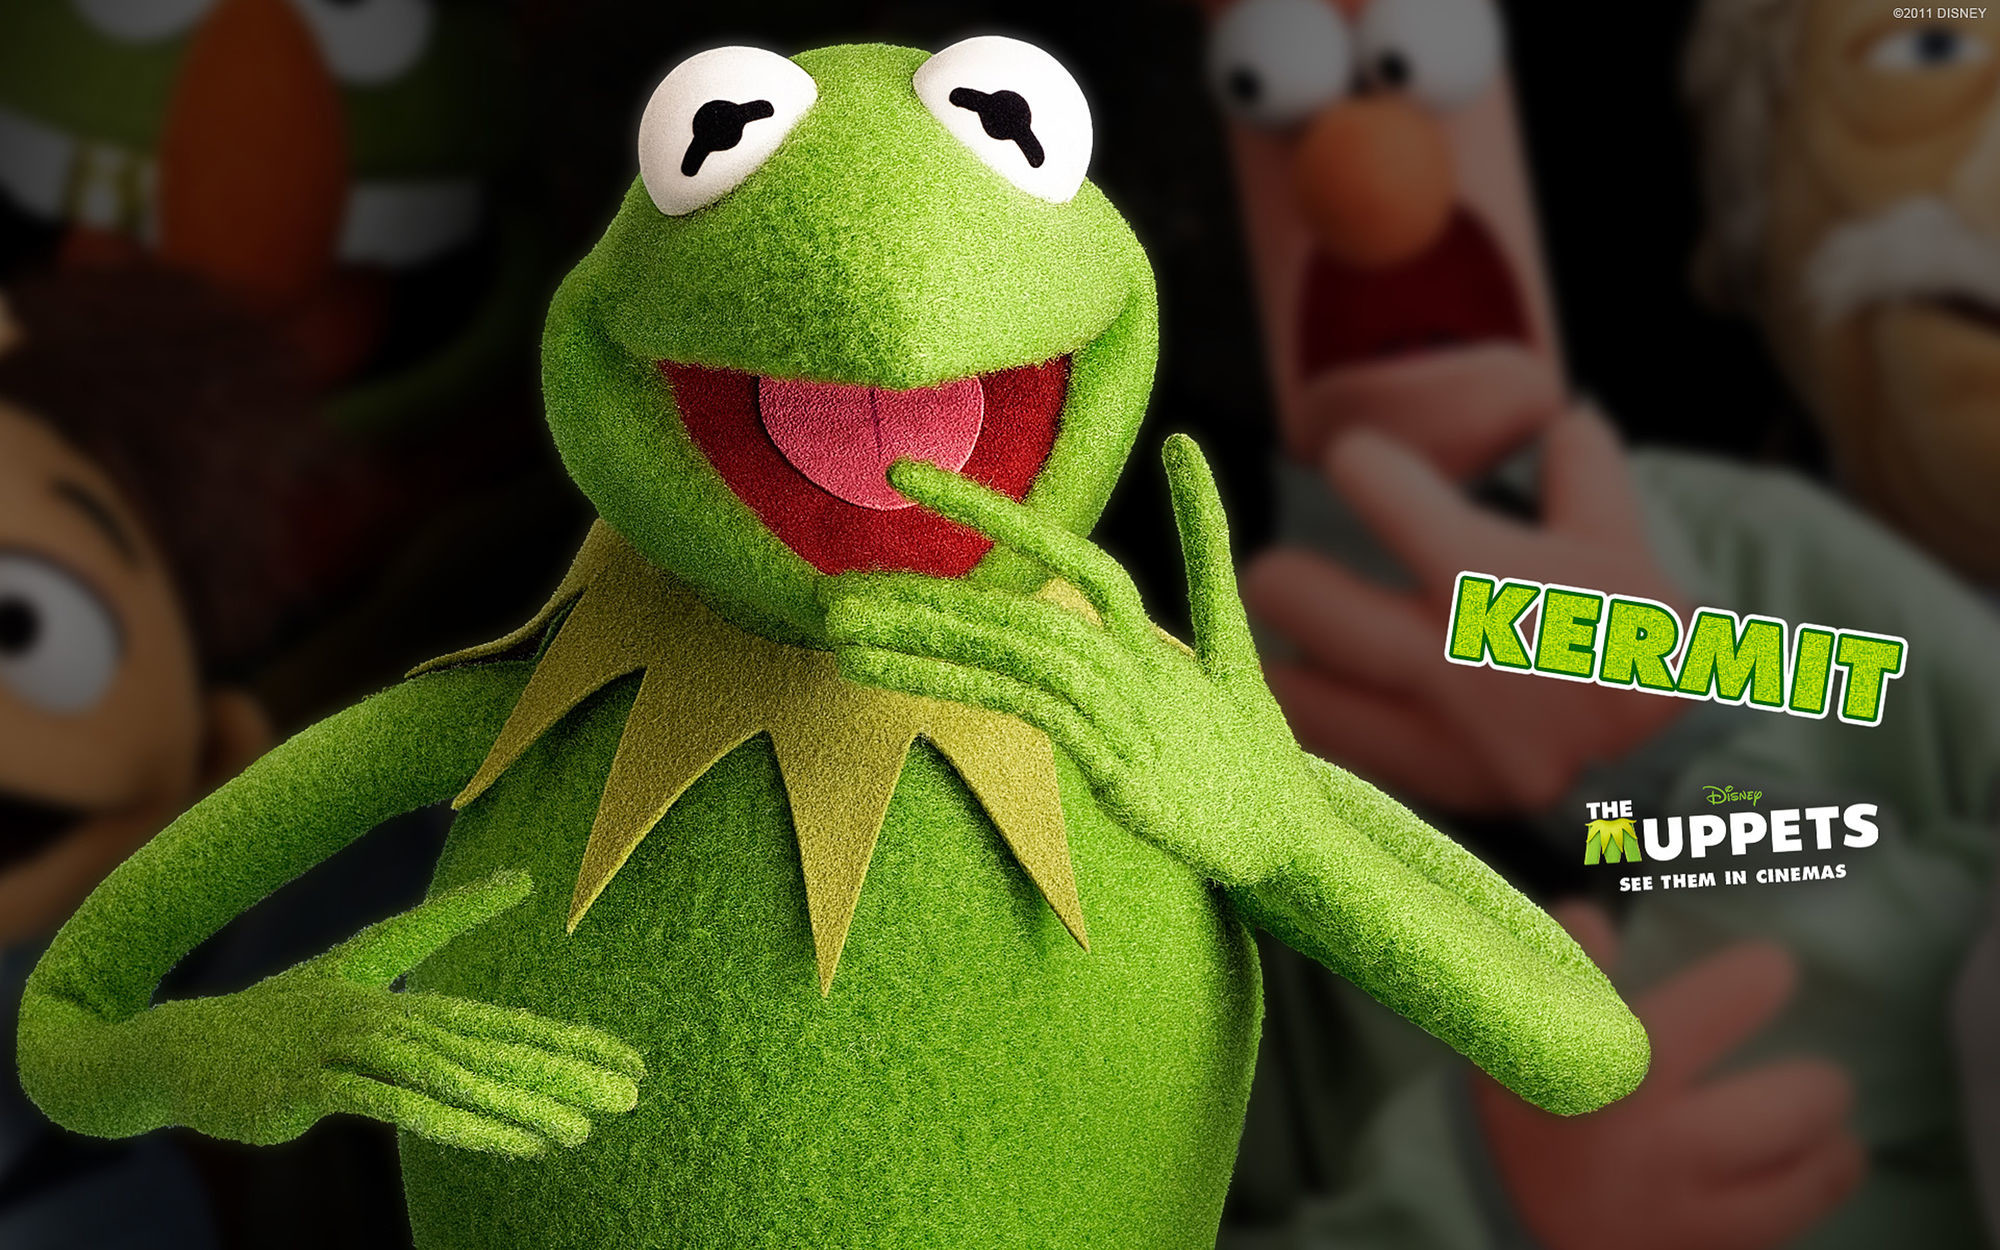 2000x1250 Kermit the Frog/Gallery | Fictional Characters Wiki | FANDOM powered by  Wikia